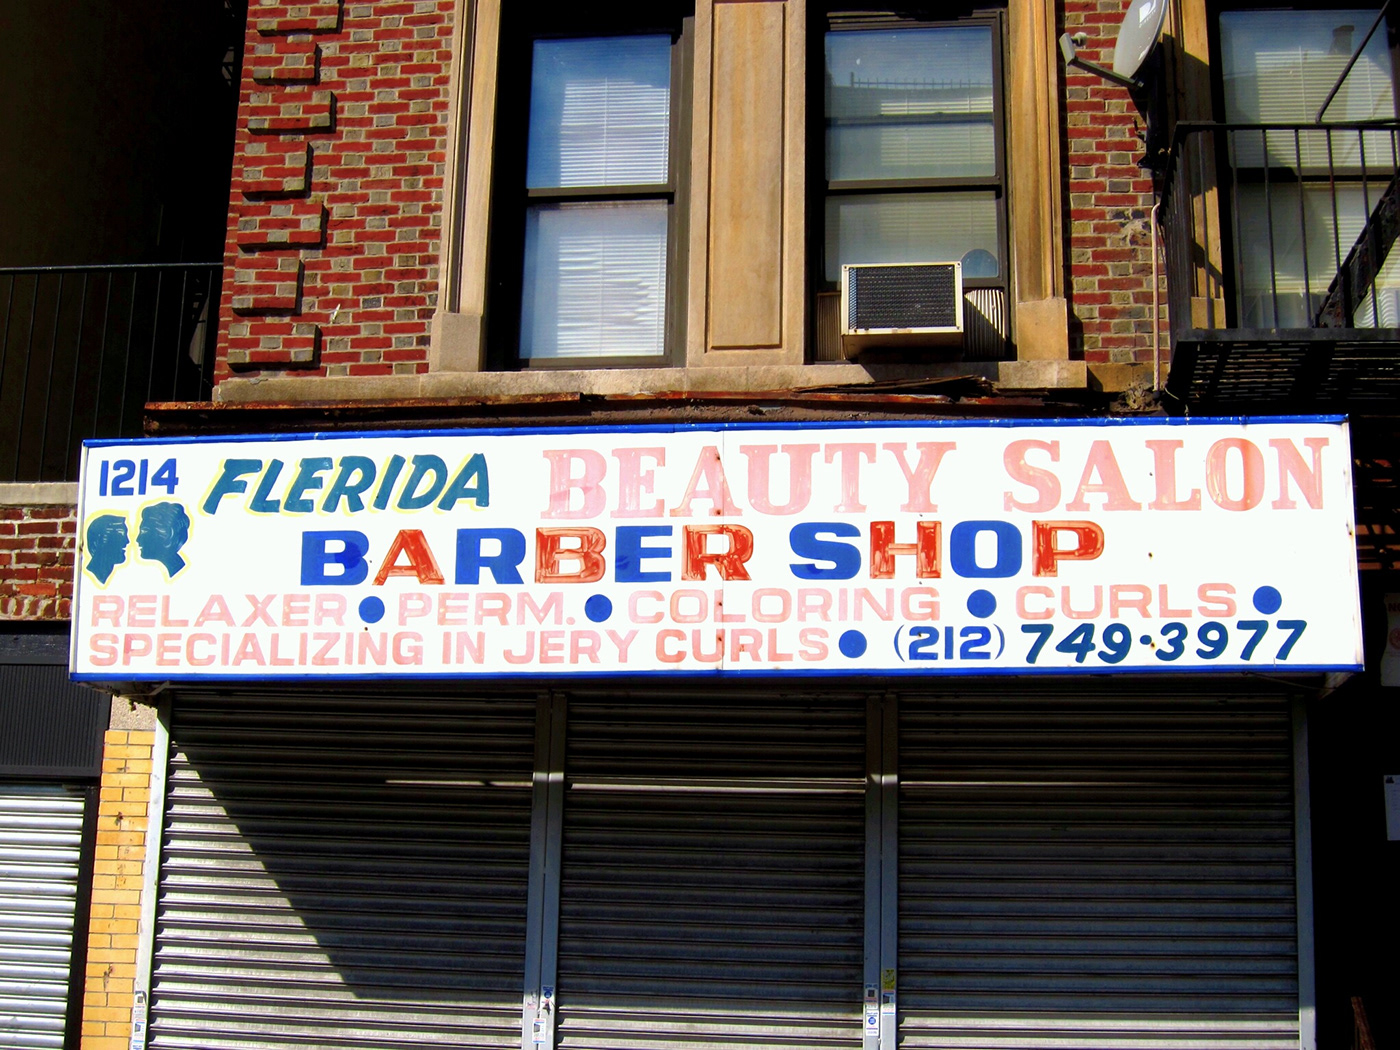 nyc typography   vernacular lettering